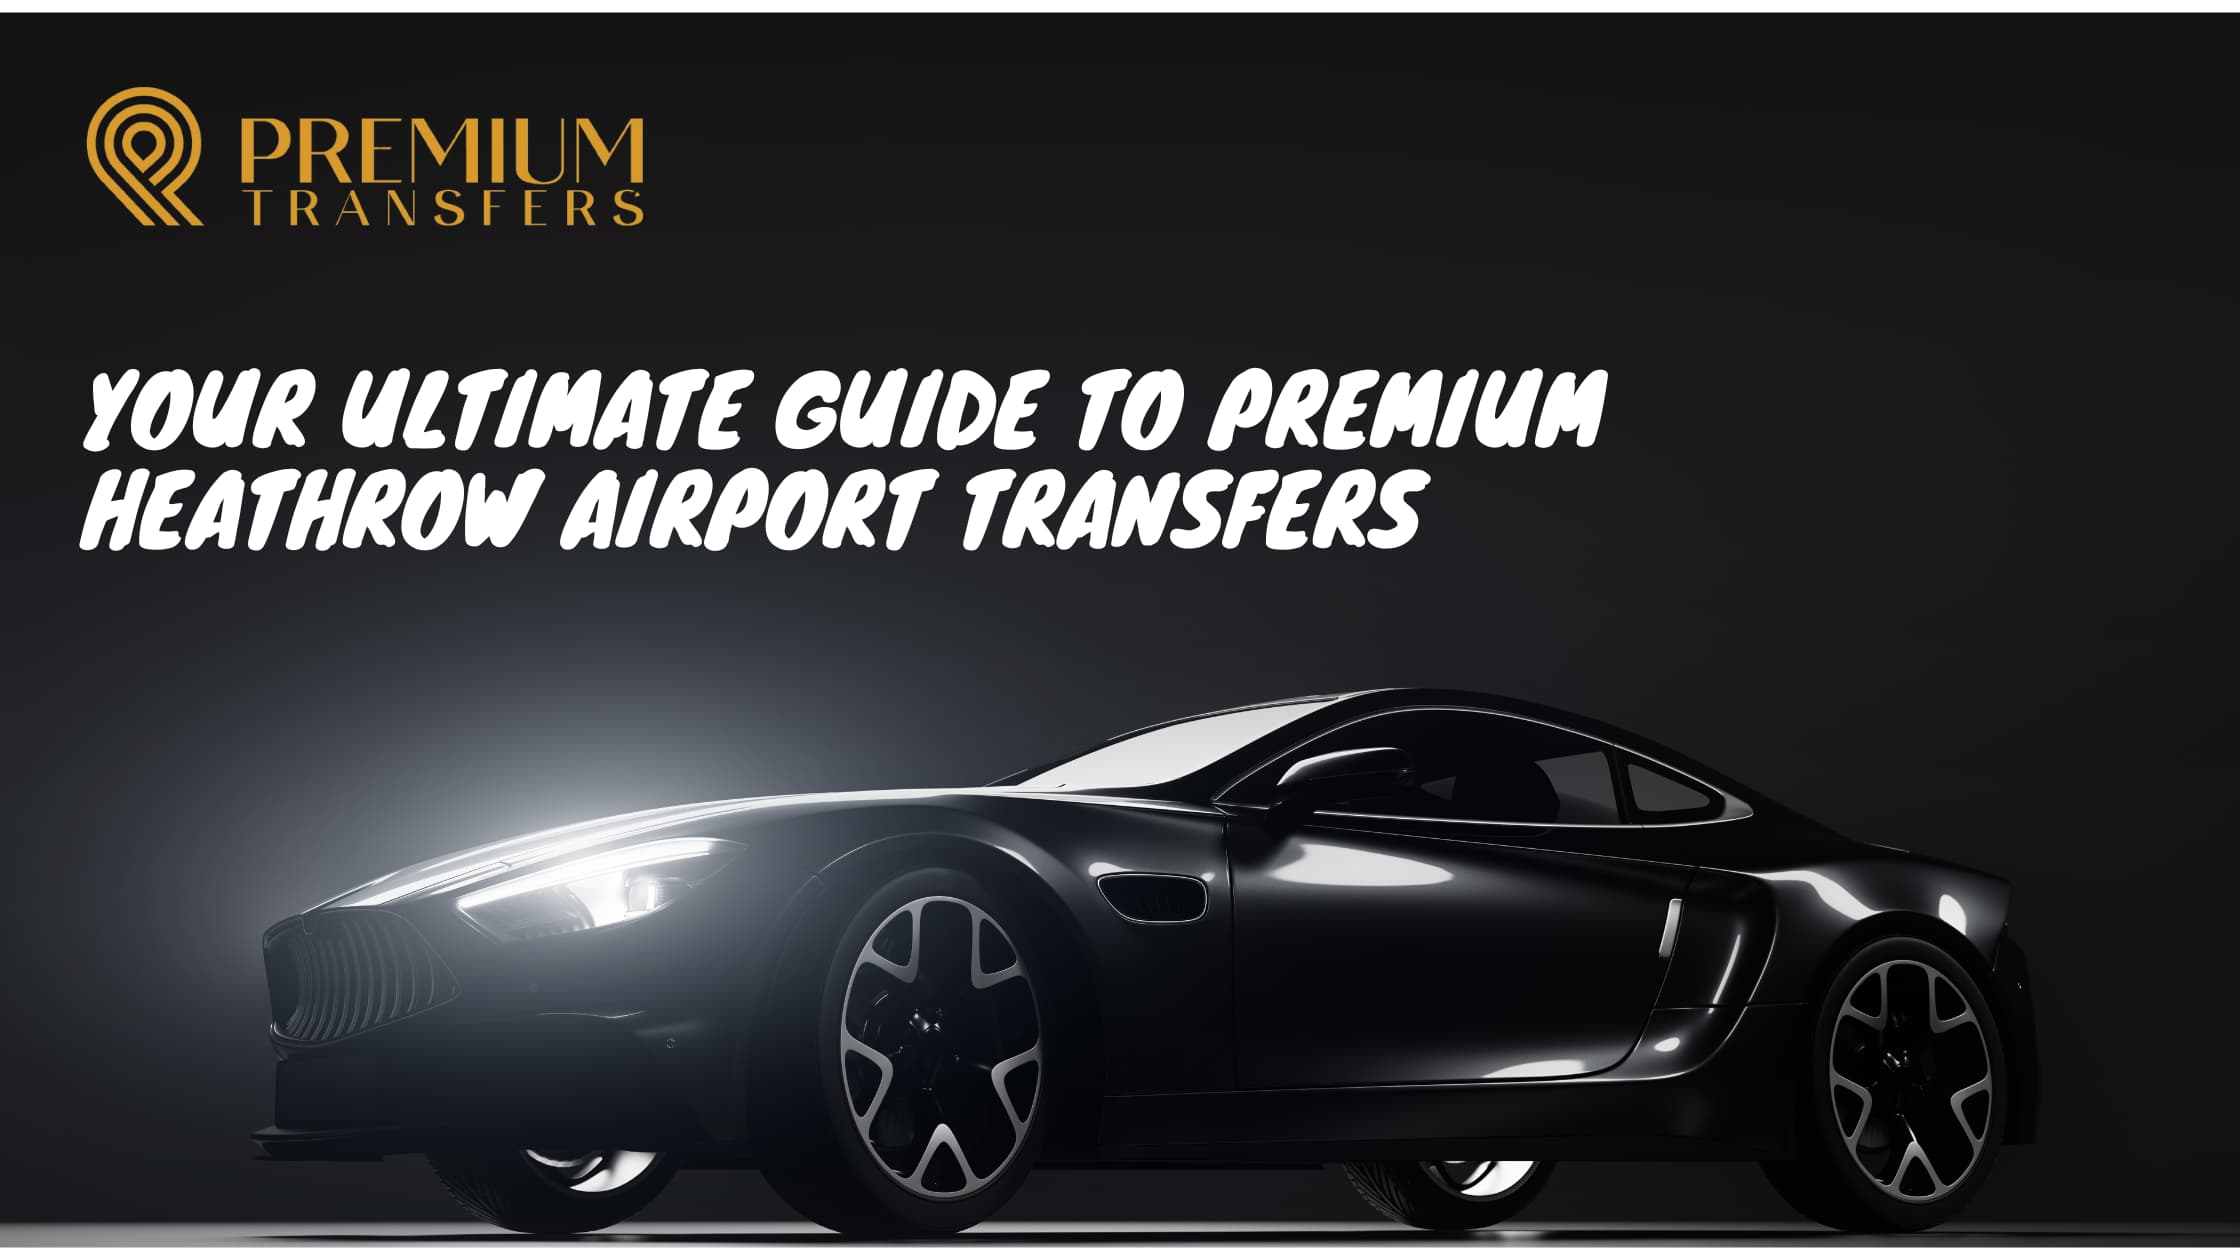 Stress-Free Travel: Your Ultimate Guide to Premium Heathrow Airport Transfers